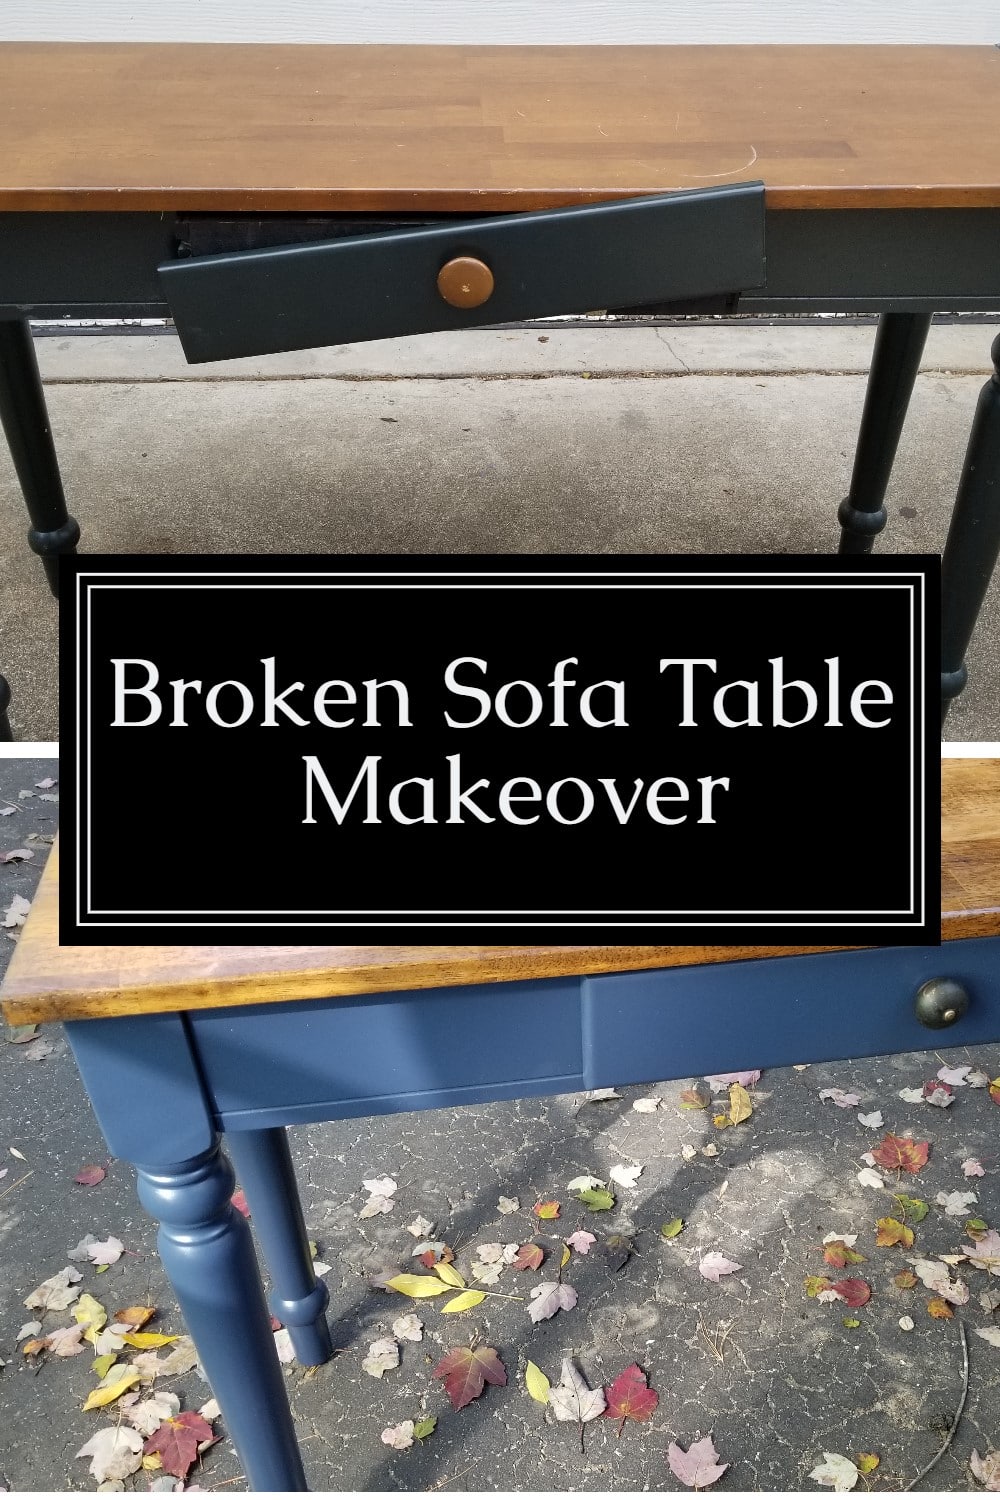 This table was found on the side of the road, but maybe you have a sofa table that needs a new and fresh update. It's easier than you think with these great tips. Change up the color, refinish the top and make any needed repairs. So easy, you can do this in a few hours. #MyRepurposedLife #table #makeover #sofatable #easy #project via @repurposedlife